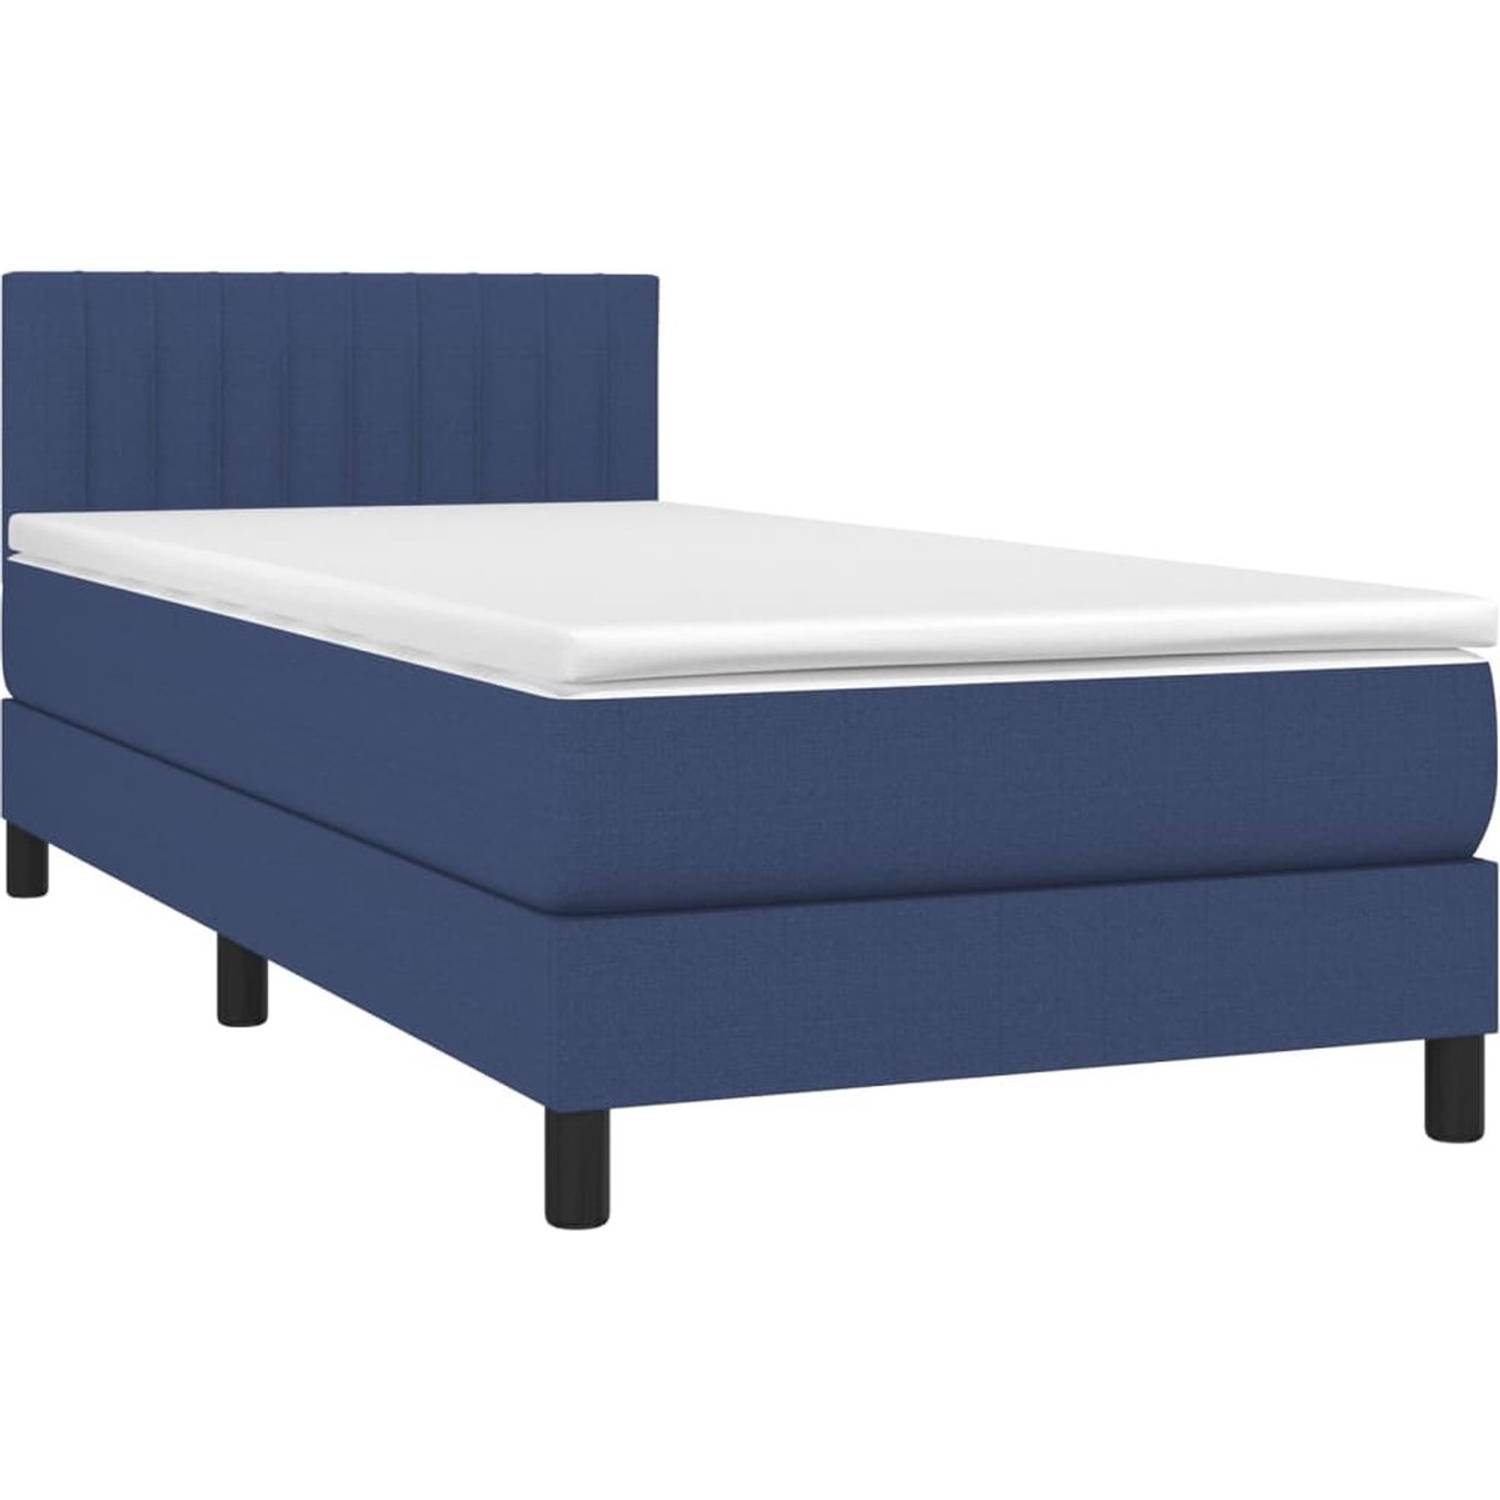 The Living Store Boxspringbed - Comfort - Bed - 203x80x78/88 cm - Blauw